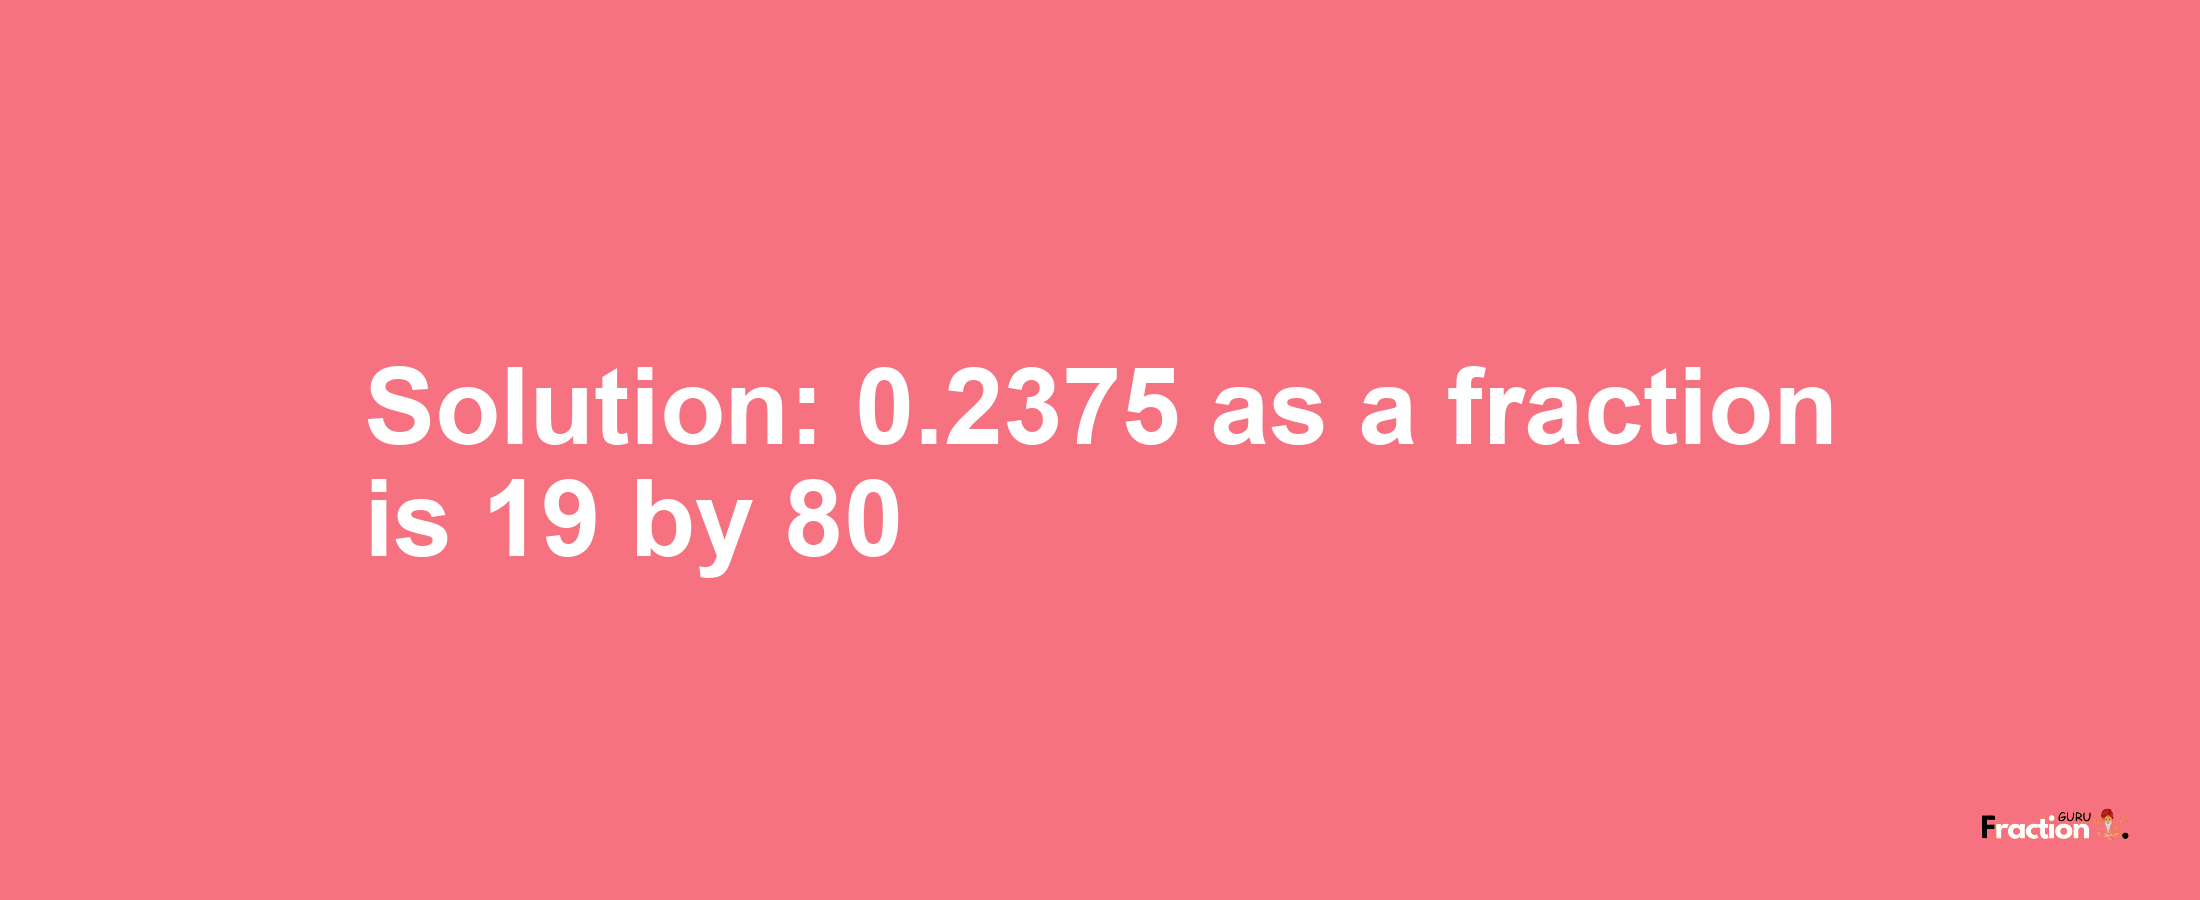 Solution:0.2375 as a fraction is 19/80